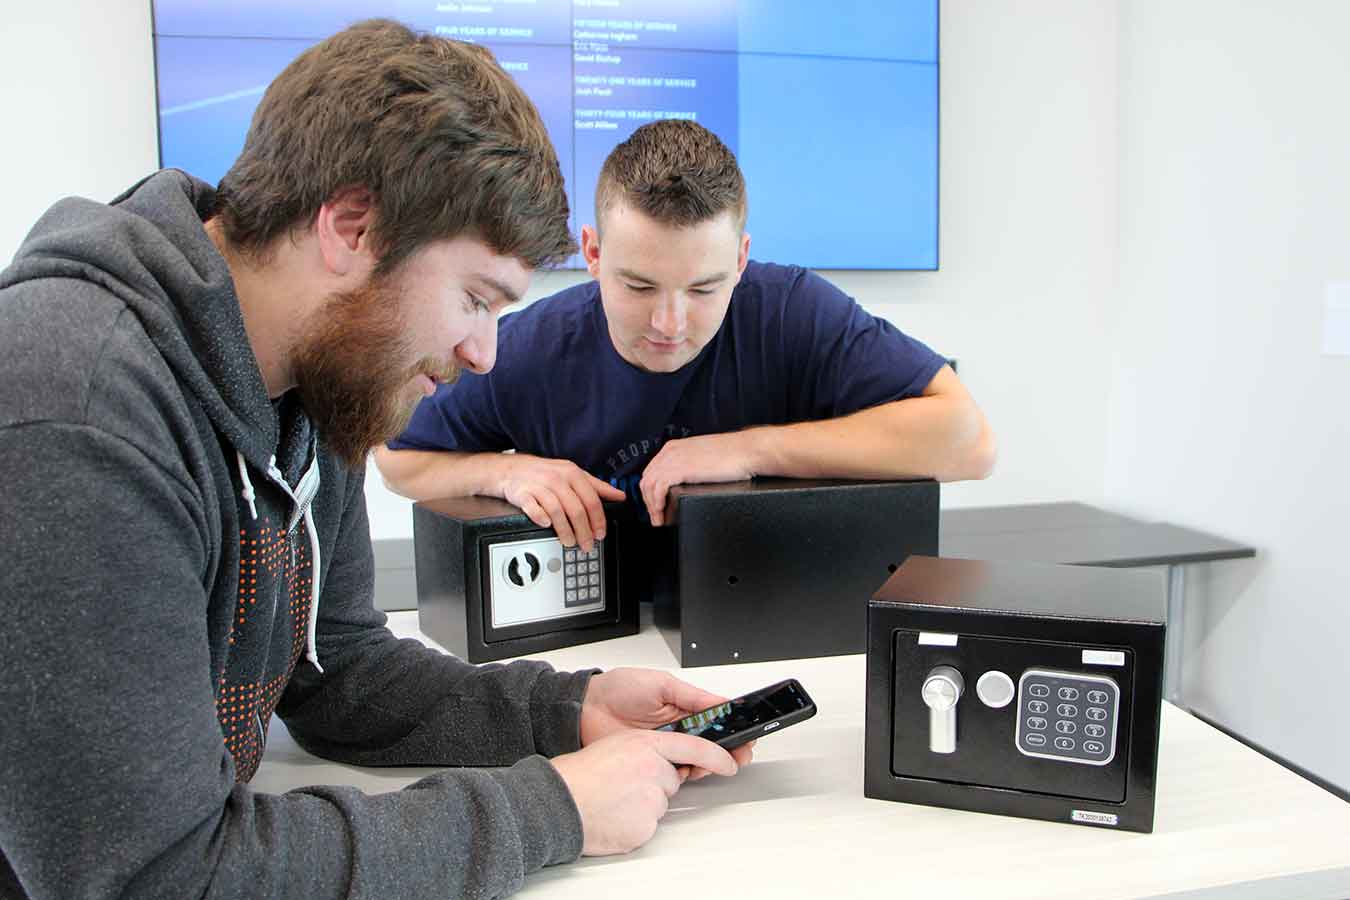 Jakob Kaiser (right) is researching hotel safes, with faculty mentor Andrew Kramer. This is one of eleven undergraduate Student Research Initiative grant projects funded this academic year.